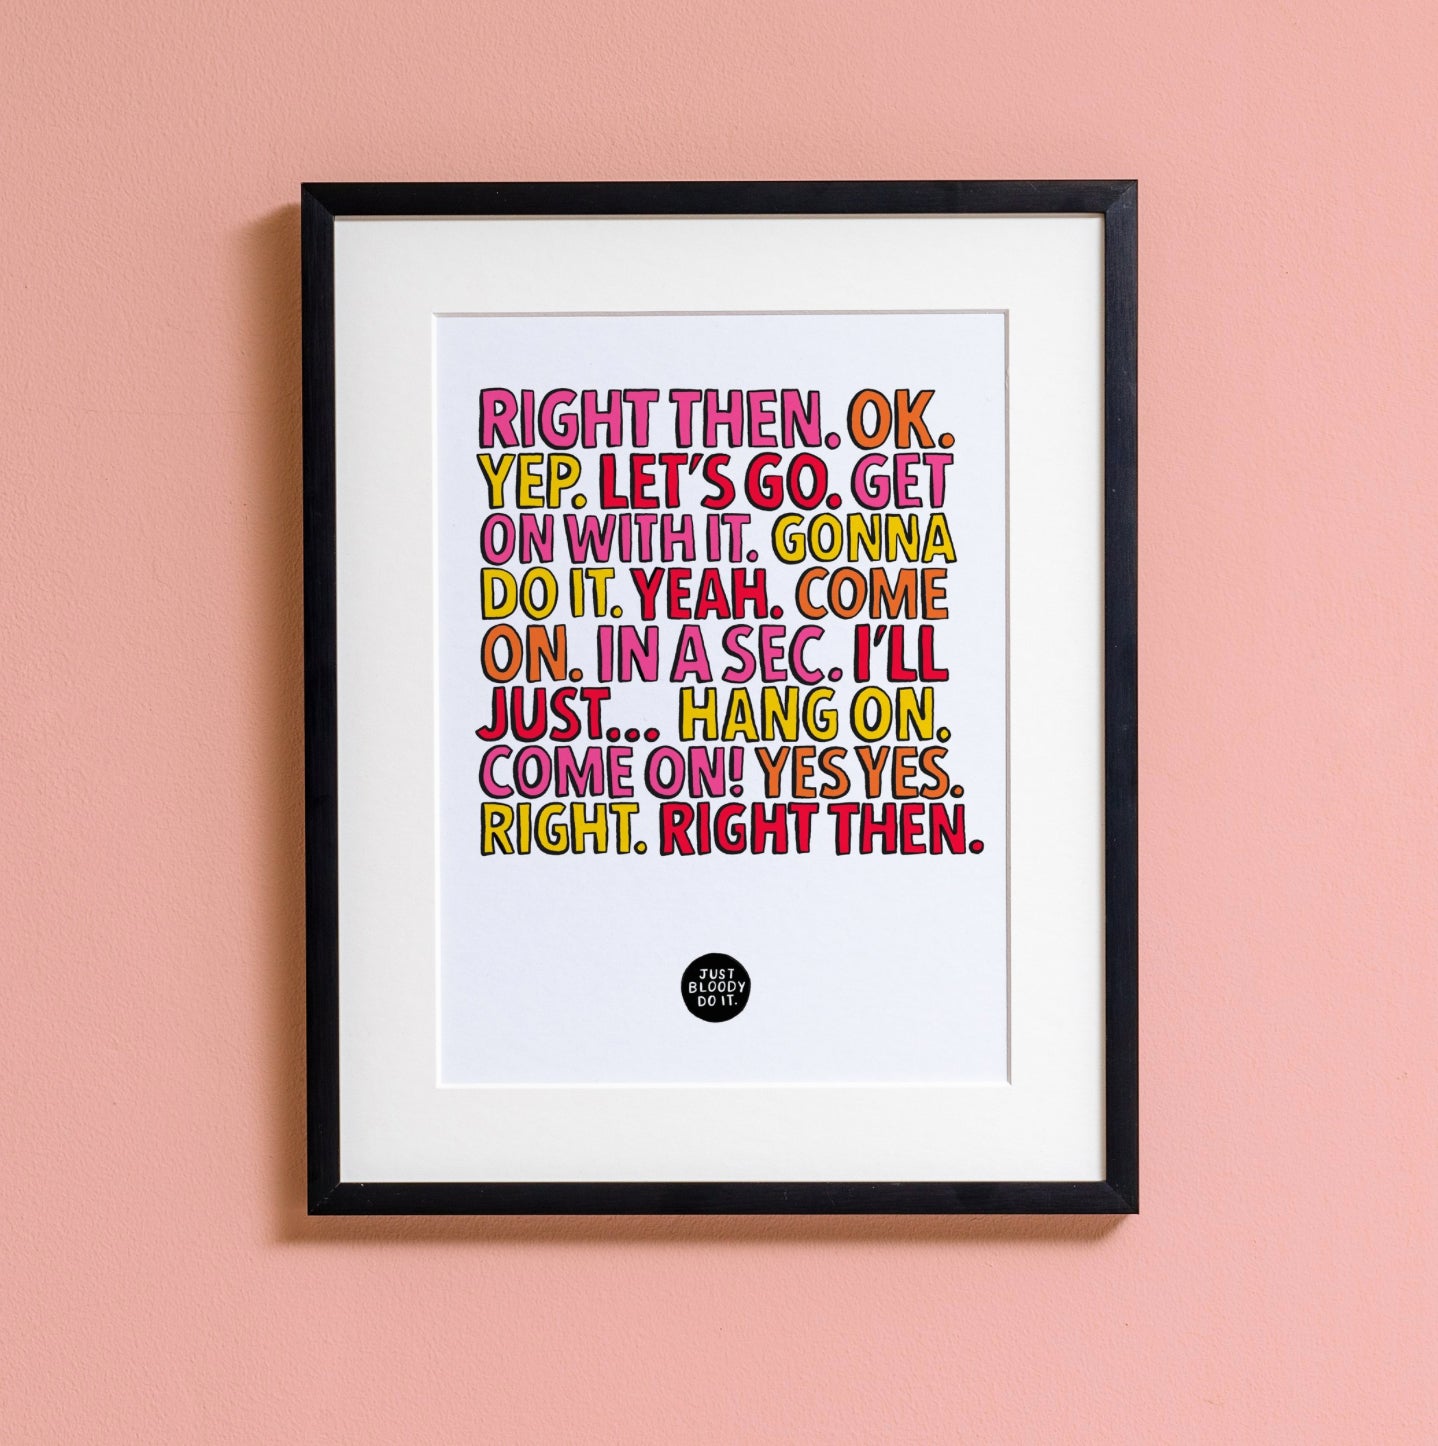 Just do it A4 print